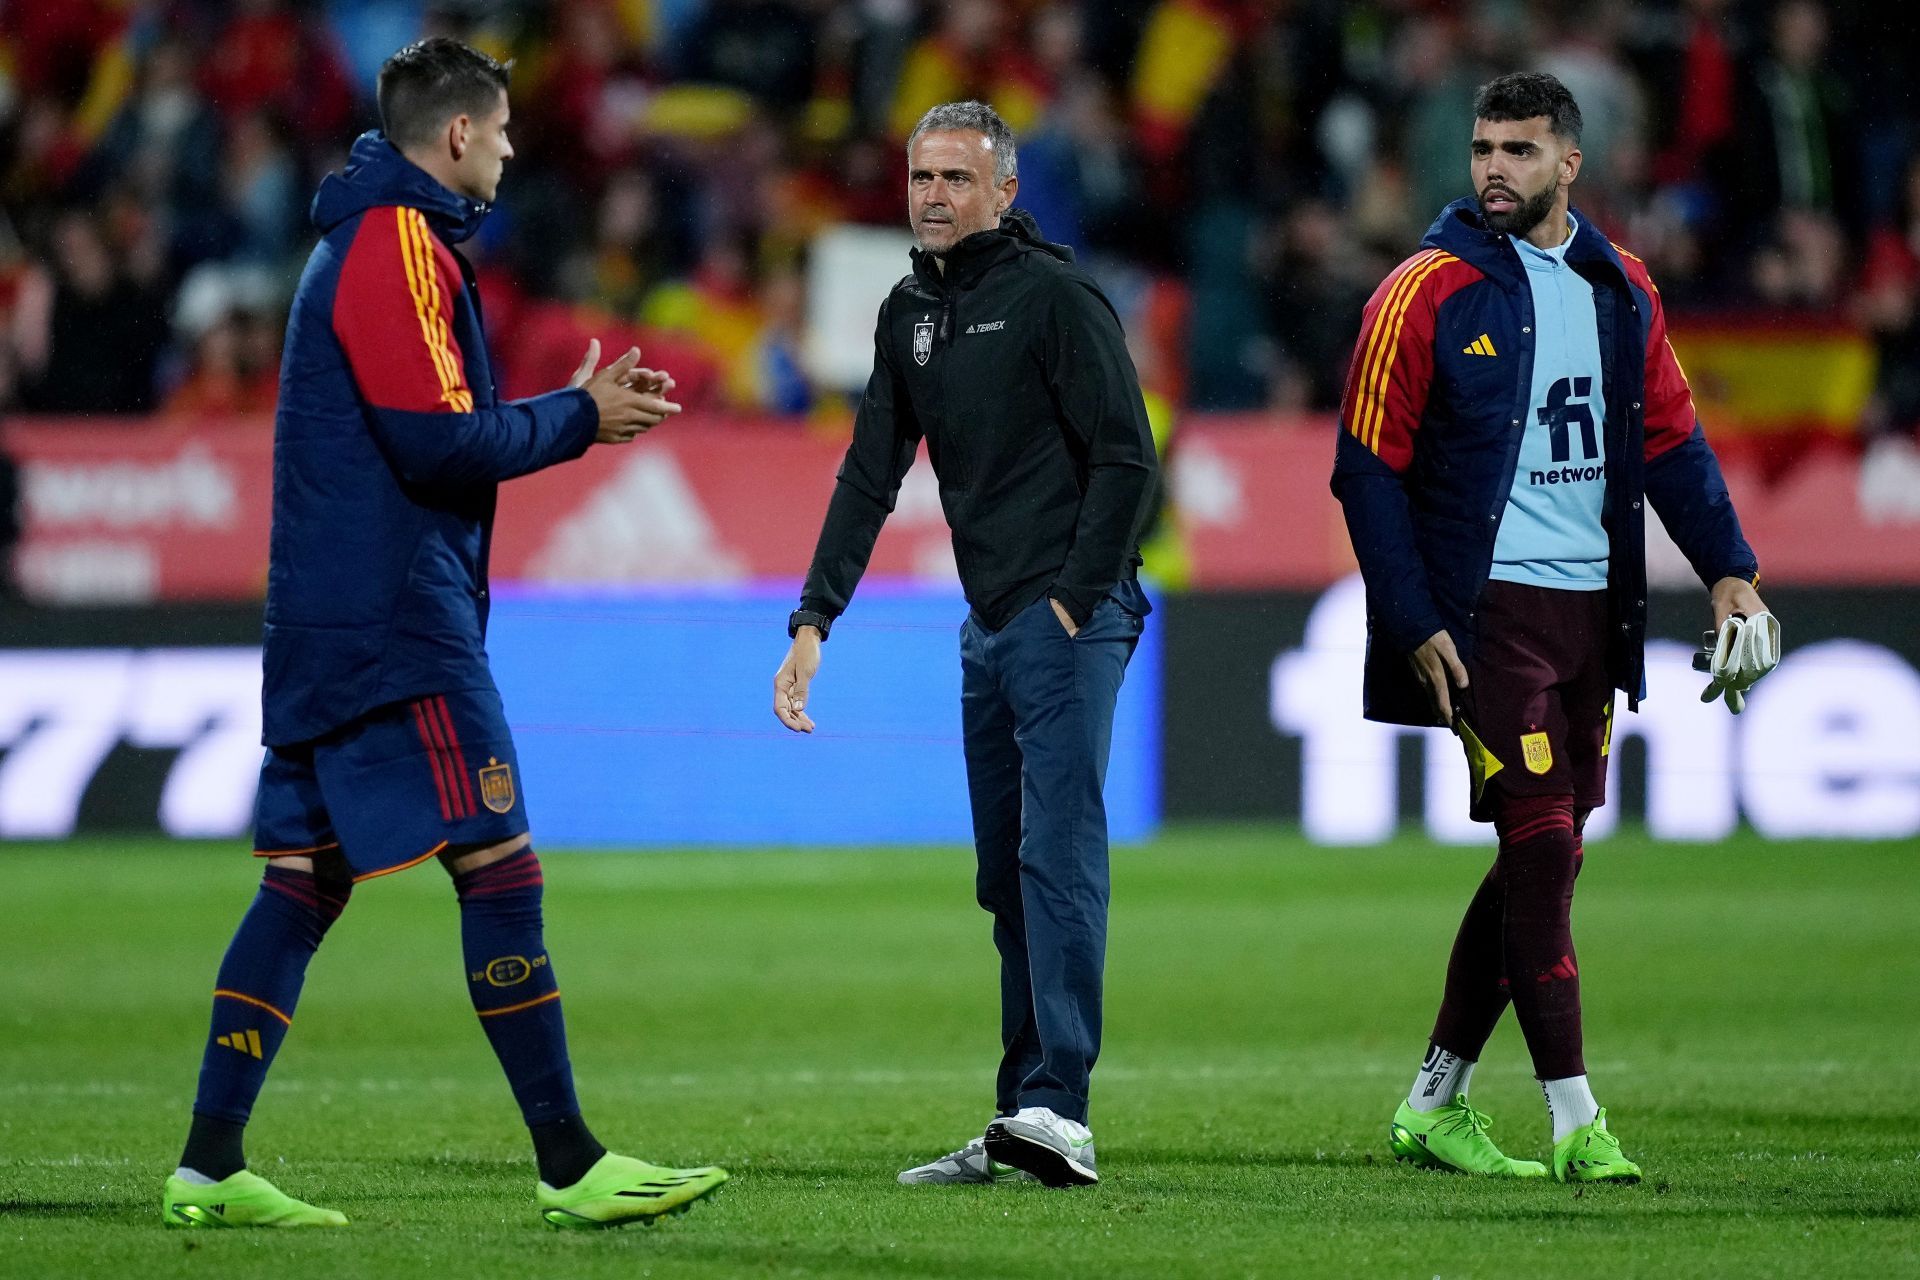 Ferran Torres spoke about Luis Enrique ahead of the 2022 FIFA World Cup